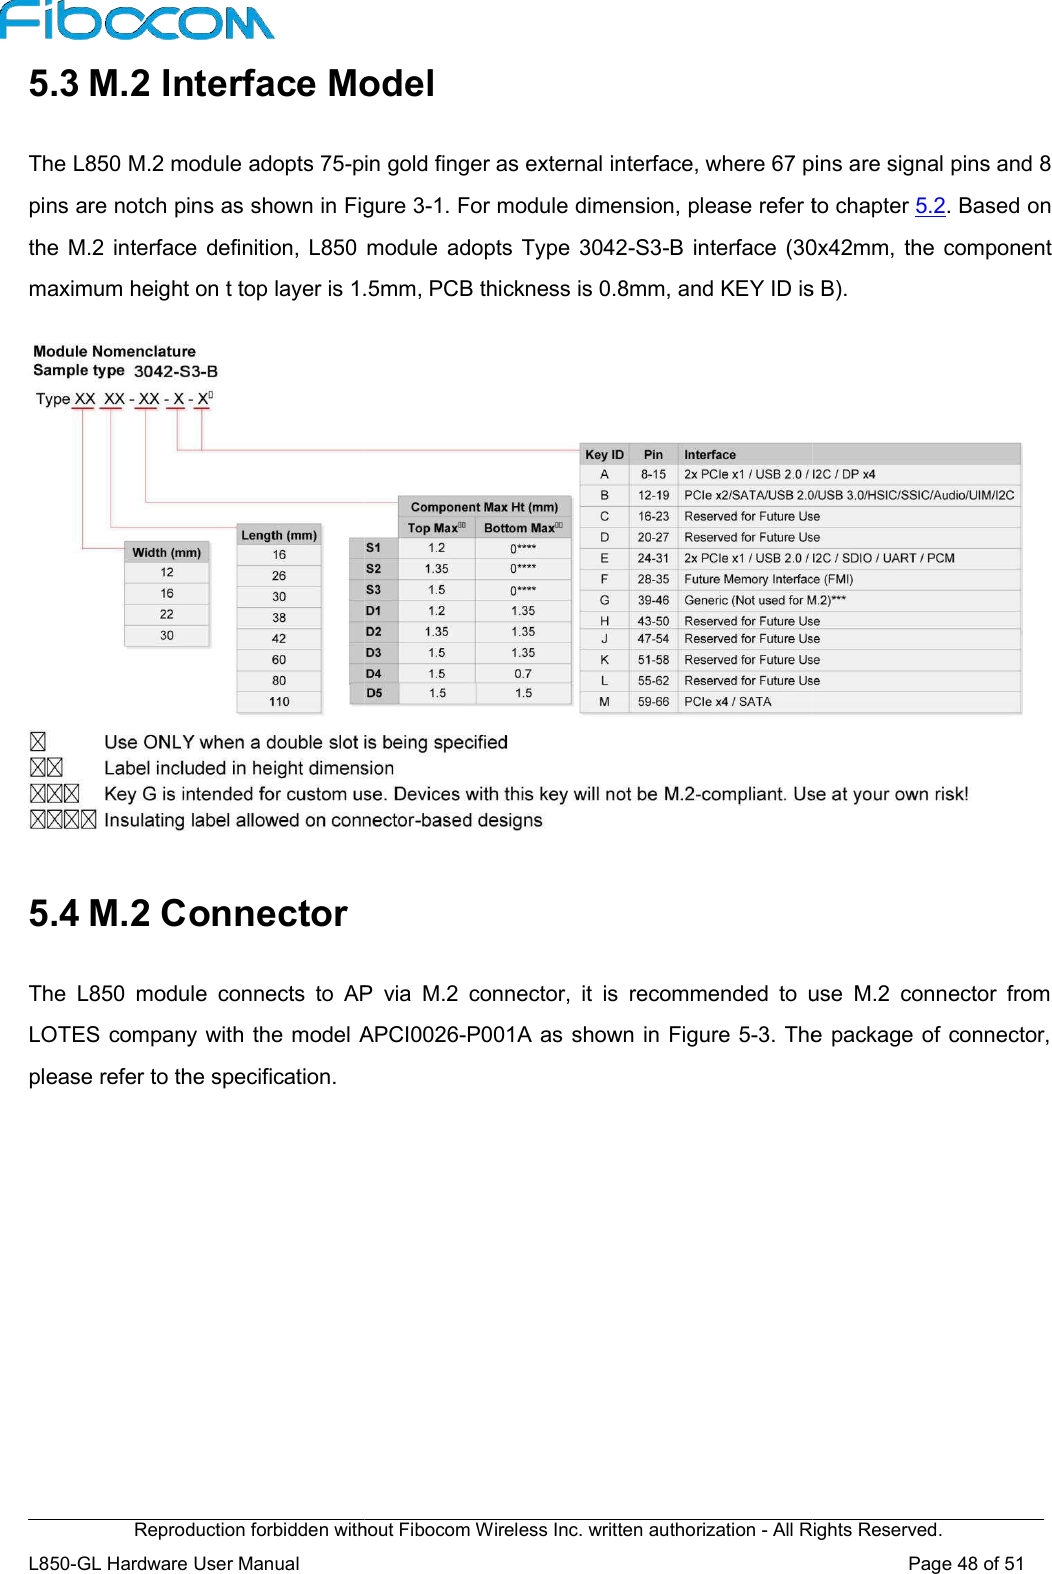 Reproduction forbidden without Fibocom Wireless Inc. written authorization L850-GL Hardware User Manual    5.3 M.2 Interface Model The L850 M.2 module adopts 75-pin gold finger as external interface, where 67 pins are signal pins and 8 pins are notch pins as shown in Figure 3the M.2 interface definition, L850 module adopts Type 3042maximum height on t top layer is 1.5mm, PCB thickness is 0.8mm, and KEY ID is B).   5.4 M.2 Connector  The  L850  module  connects  to  AP  via  M.2  connector,  it  is  recommended  to  use  M.2  connLOTES company with the model APCI0026please refer to the specification. Reproduction forbidden without Fibocom Wireless Inc. written authorization - All Rights Reserved.Model pin gold finger as external interface, where 67 pins are signal pins and 8 pins are notch pins as shown in Figure 3-1. For module dimension, please refer to chapter on, L850 module adopts Type 3042-S3-B interface (30x42mm, the  component maximum height on t top layer is 1.5mm, PCB thickness is 0.8mm, and KEY ID is B). The  L850  module  connects  to  AP  via  M.2  connector,  it  is  recommended  to  use  M.2  connLOTES company with the model APCI0026-P001A as shown in Figure 5-3. The package of connector, All Rights Reserved. Page 48 of 51 pin gold finger as external interface, where 67 pins are signal pins and 8 1. For module dimension, please refer to chapter 5.2. Based on B interface (30x42mm, the  component maximum height on t top layer is 1.5mm, PCB thickness is 0.8mm, and KEY ID is B). The  L850  module  connects  to  AP  via  M.2  connector,  it  is  recommended  to  use  M.2  connector  from 3. The package of connector, 